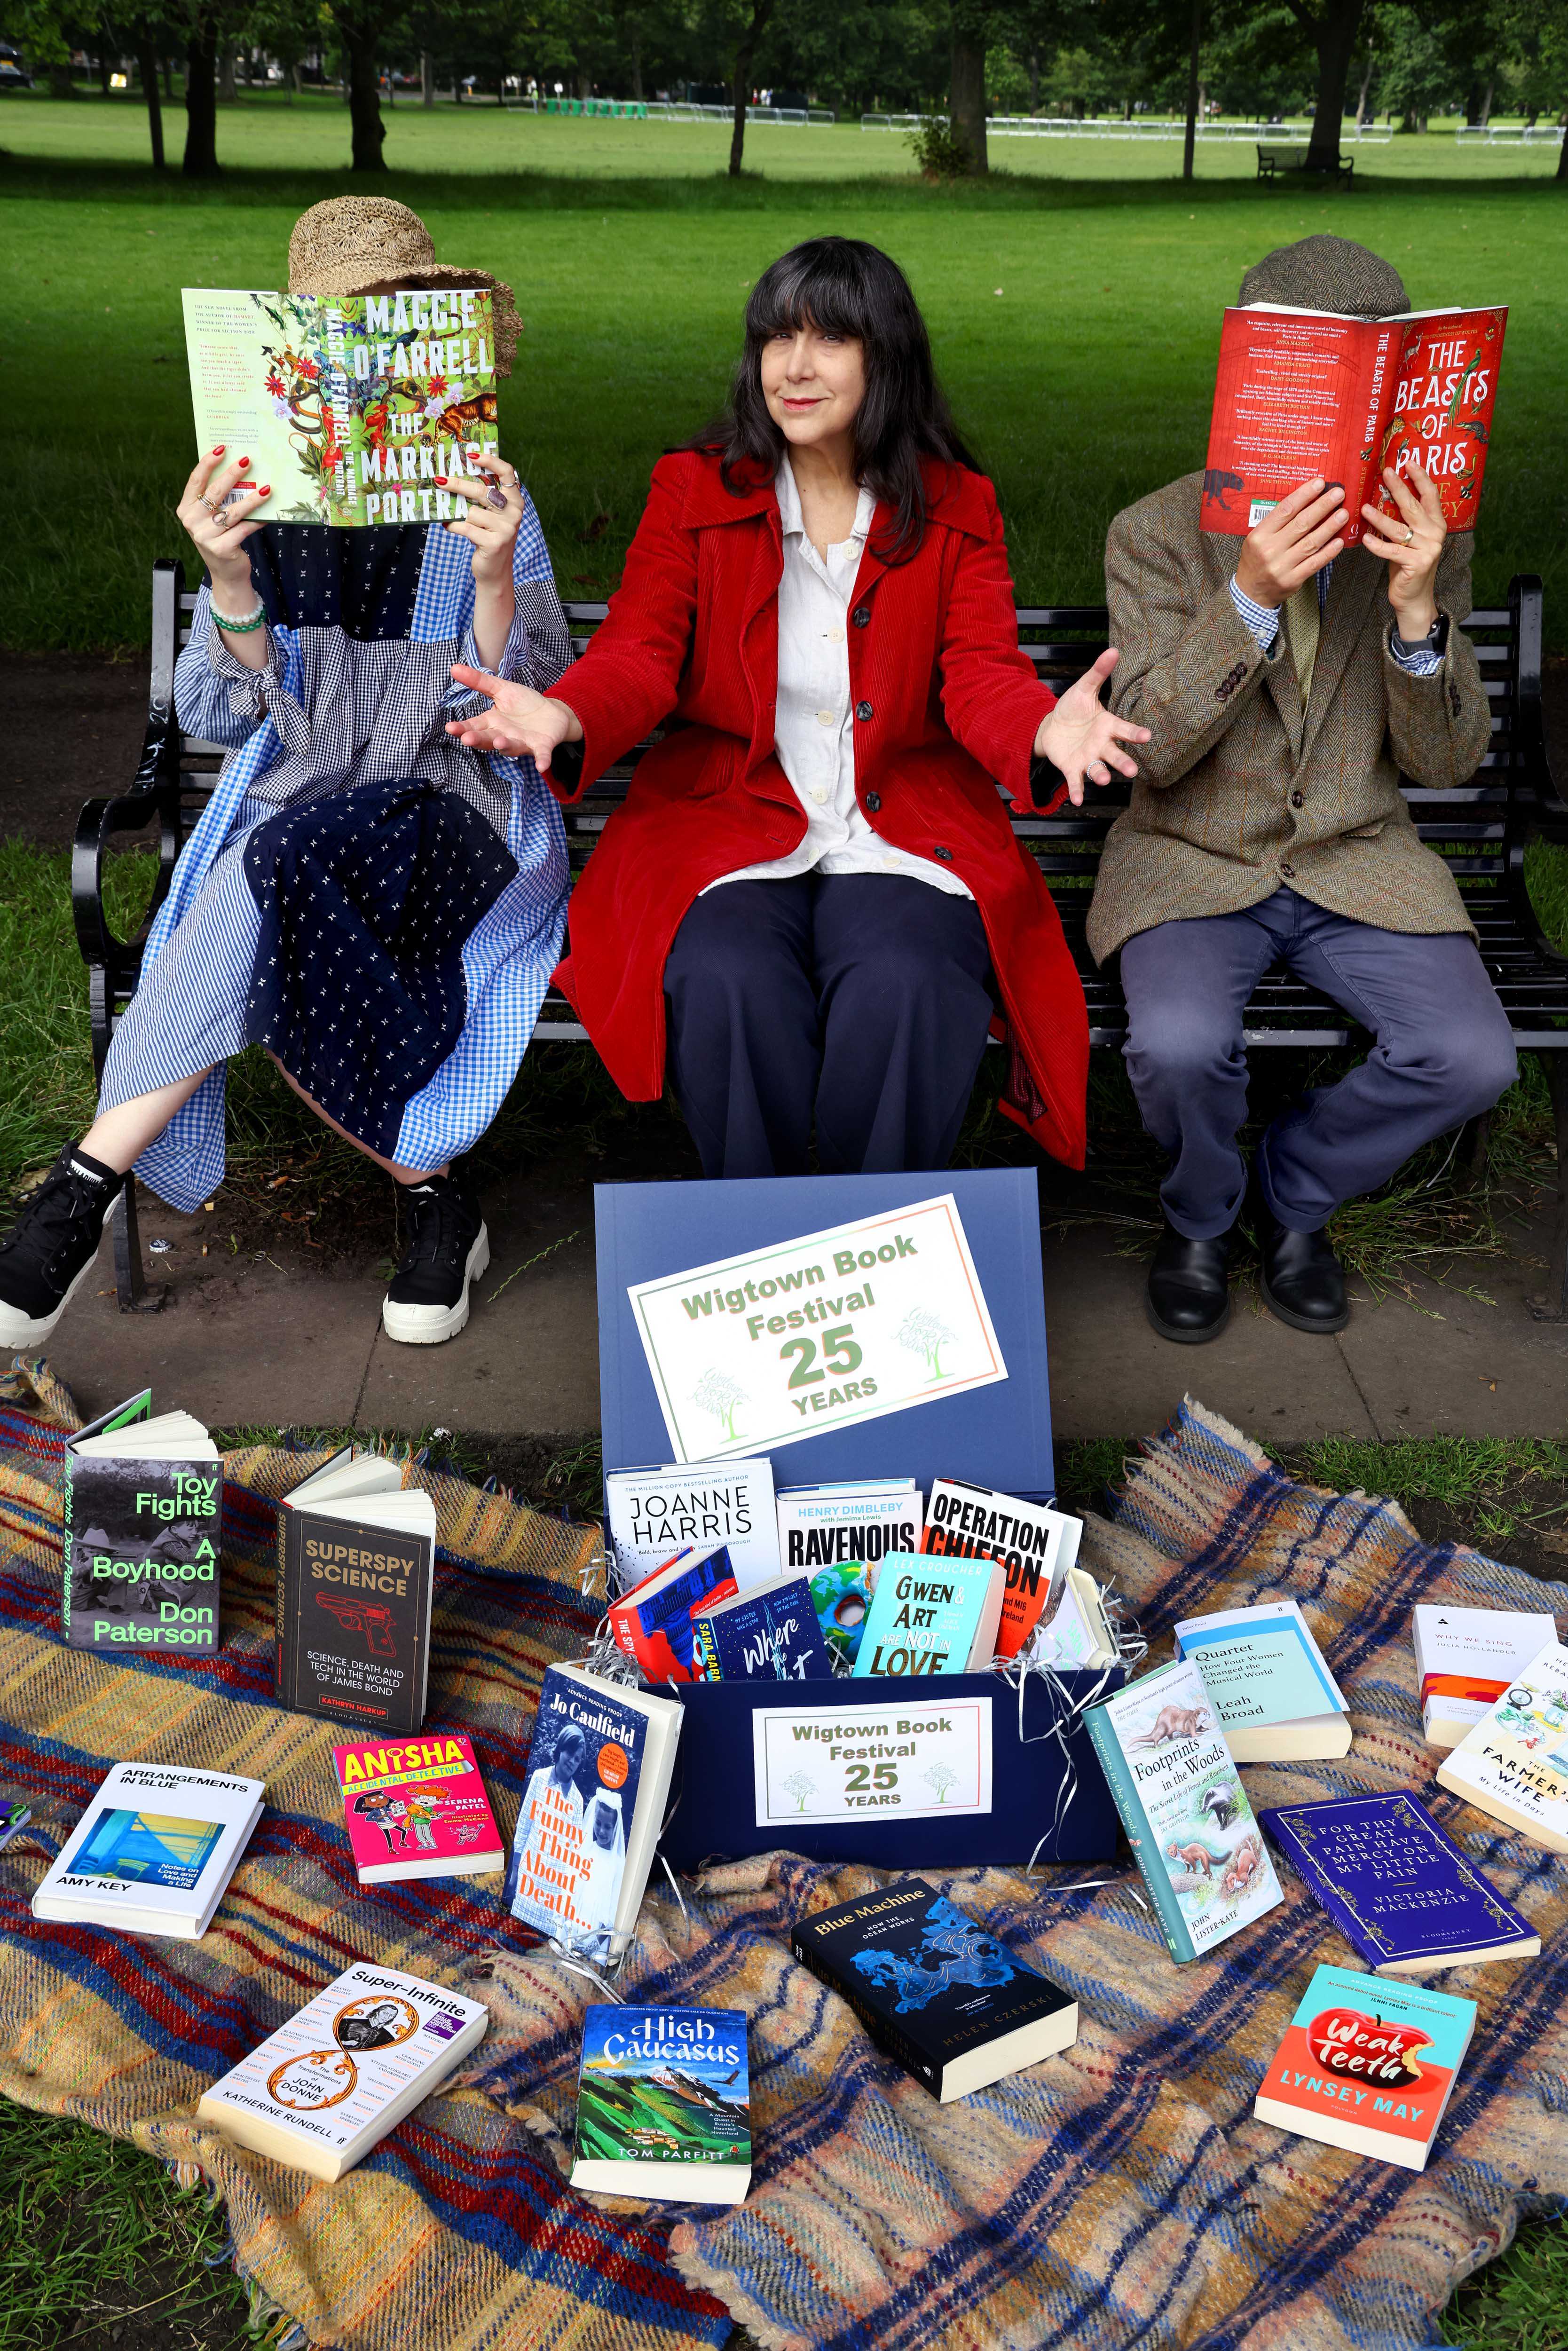 Lee Randall, Guest Programmer for Wigtown Festival Company sits on a bench in a park holding books to promote the twenty fifth anniversary of the Wigtown Book Festival.  On each side of her sits a person also holding an open book, many books are scattered on a blanket in front of them.